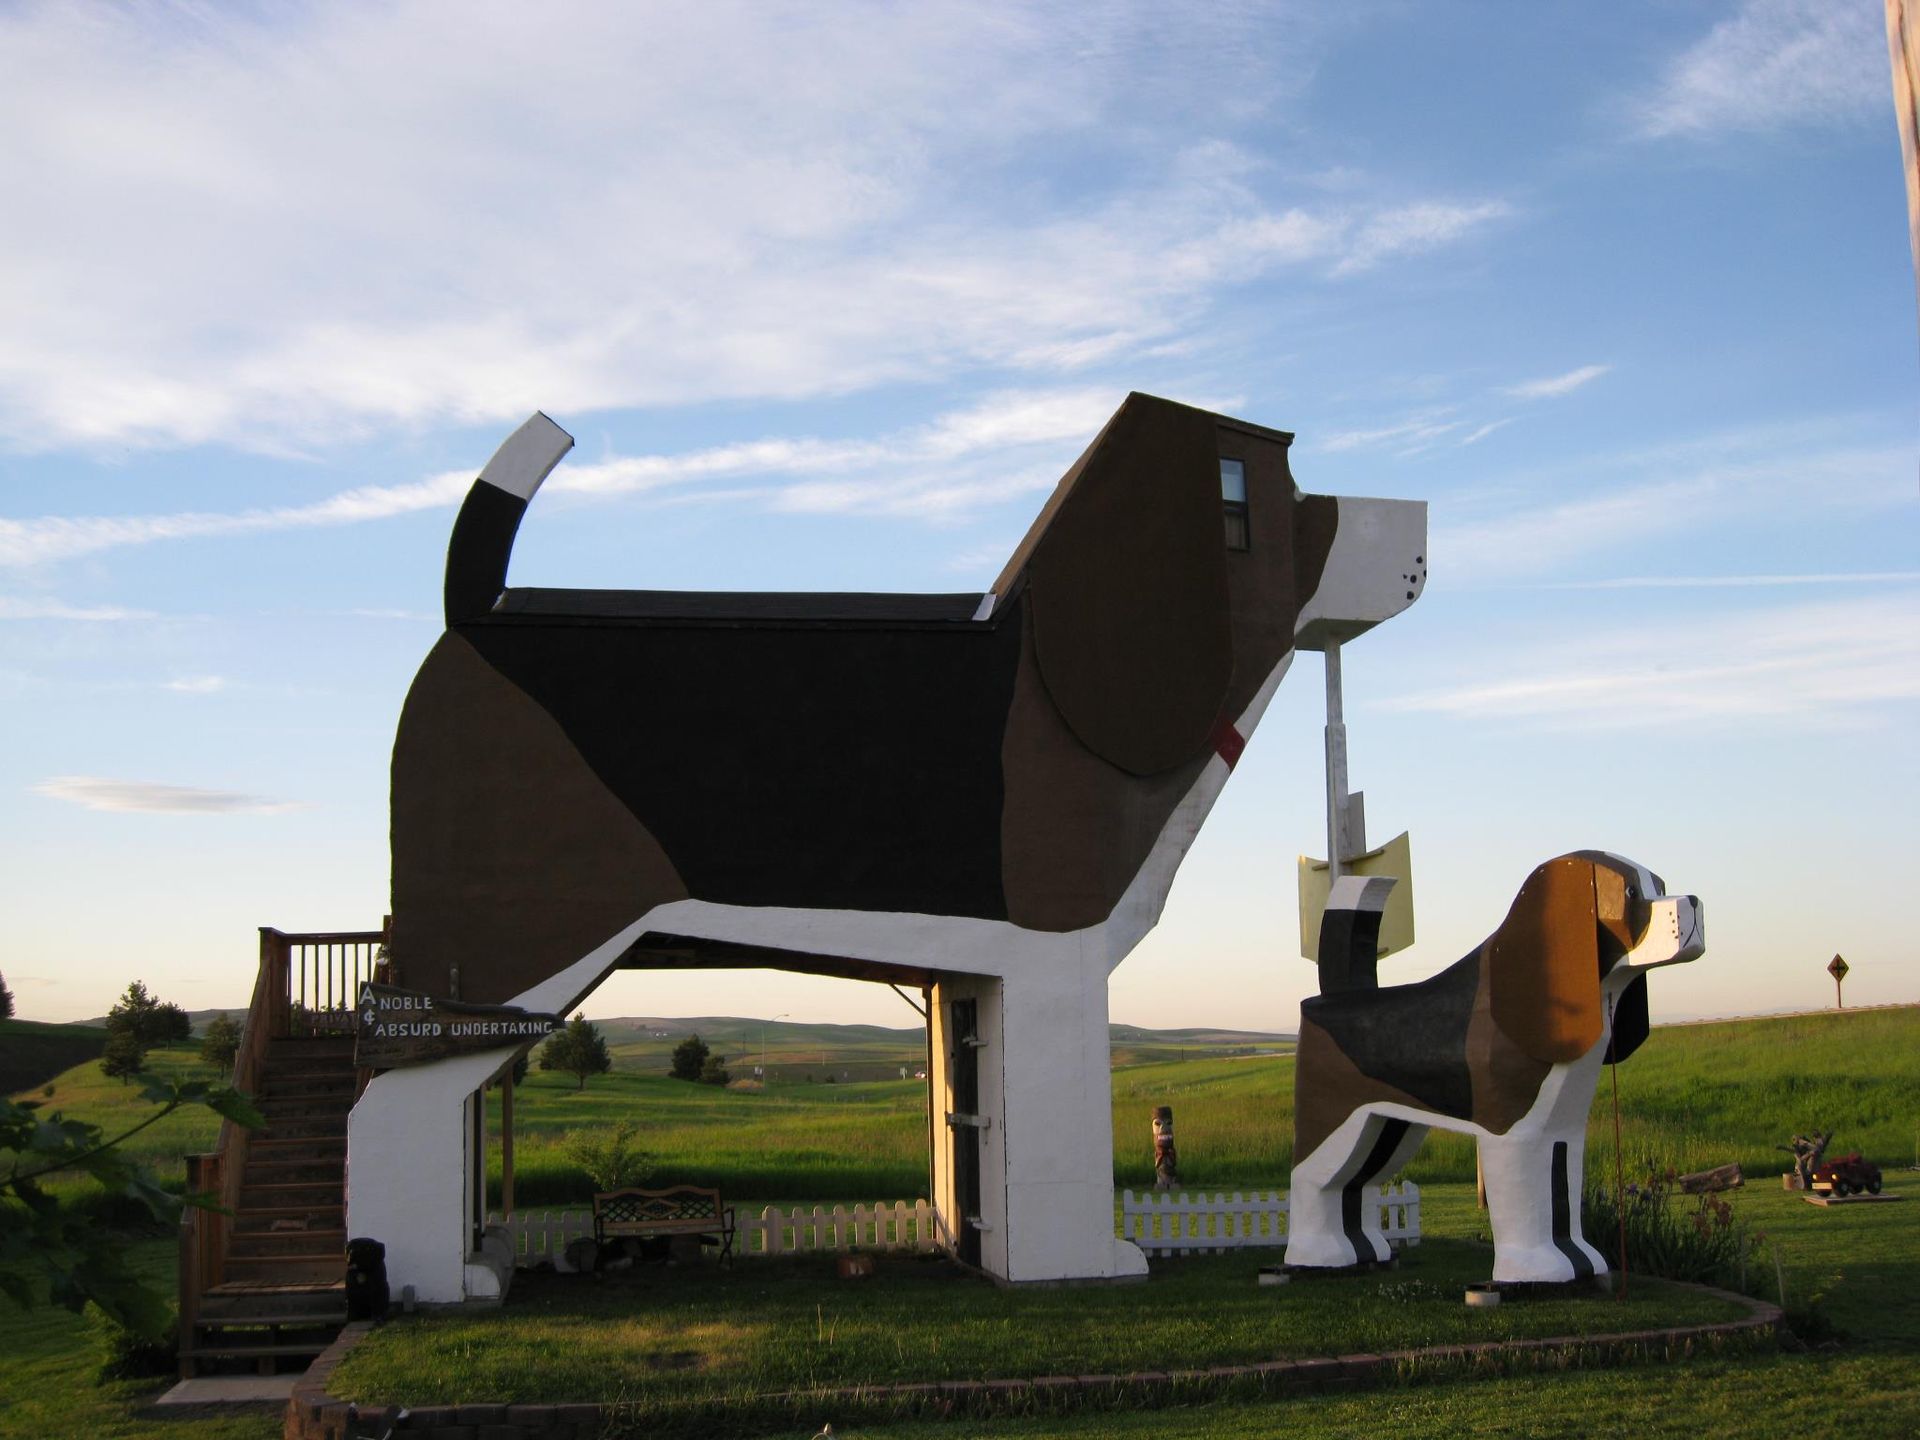 World's First Beagle-shaped Bed and breakfast, world record in Cottonwood, Idaho
